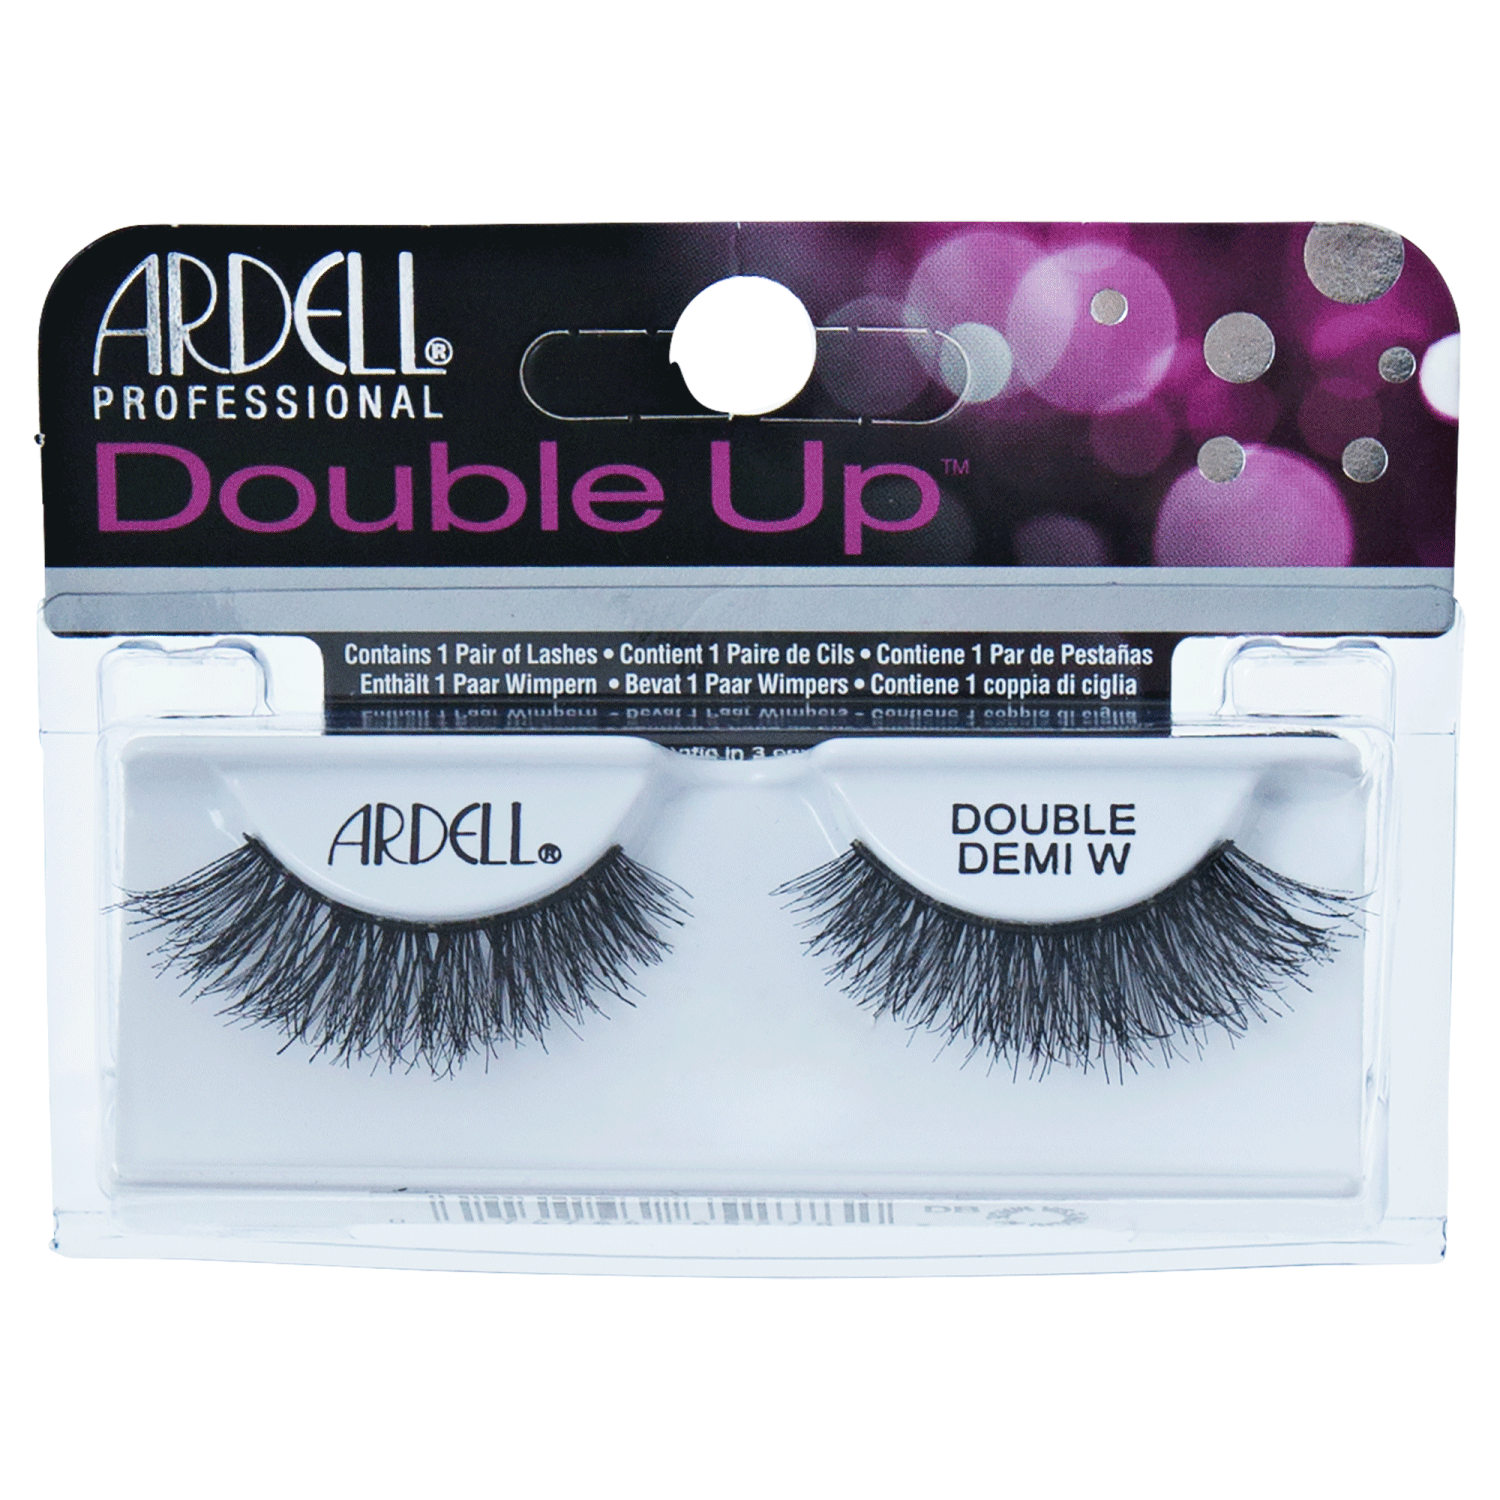 Double Up Demi Wispies Lashes